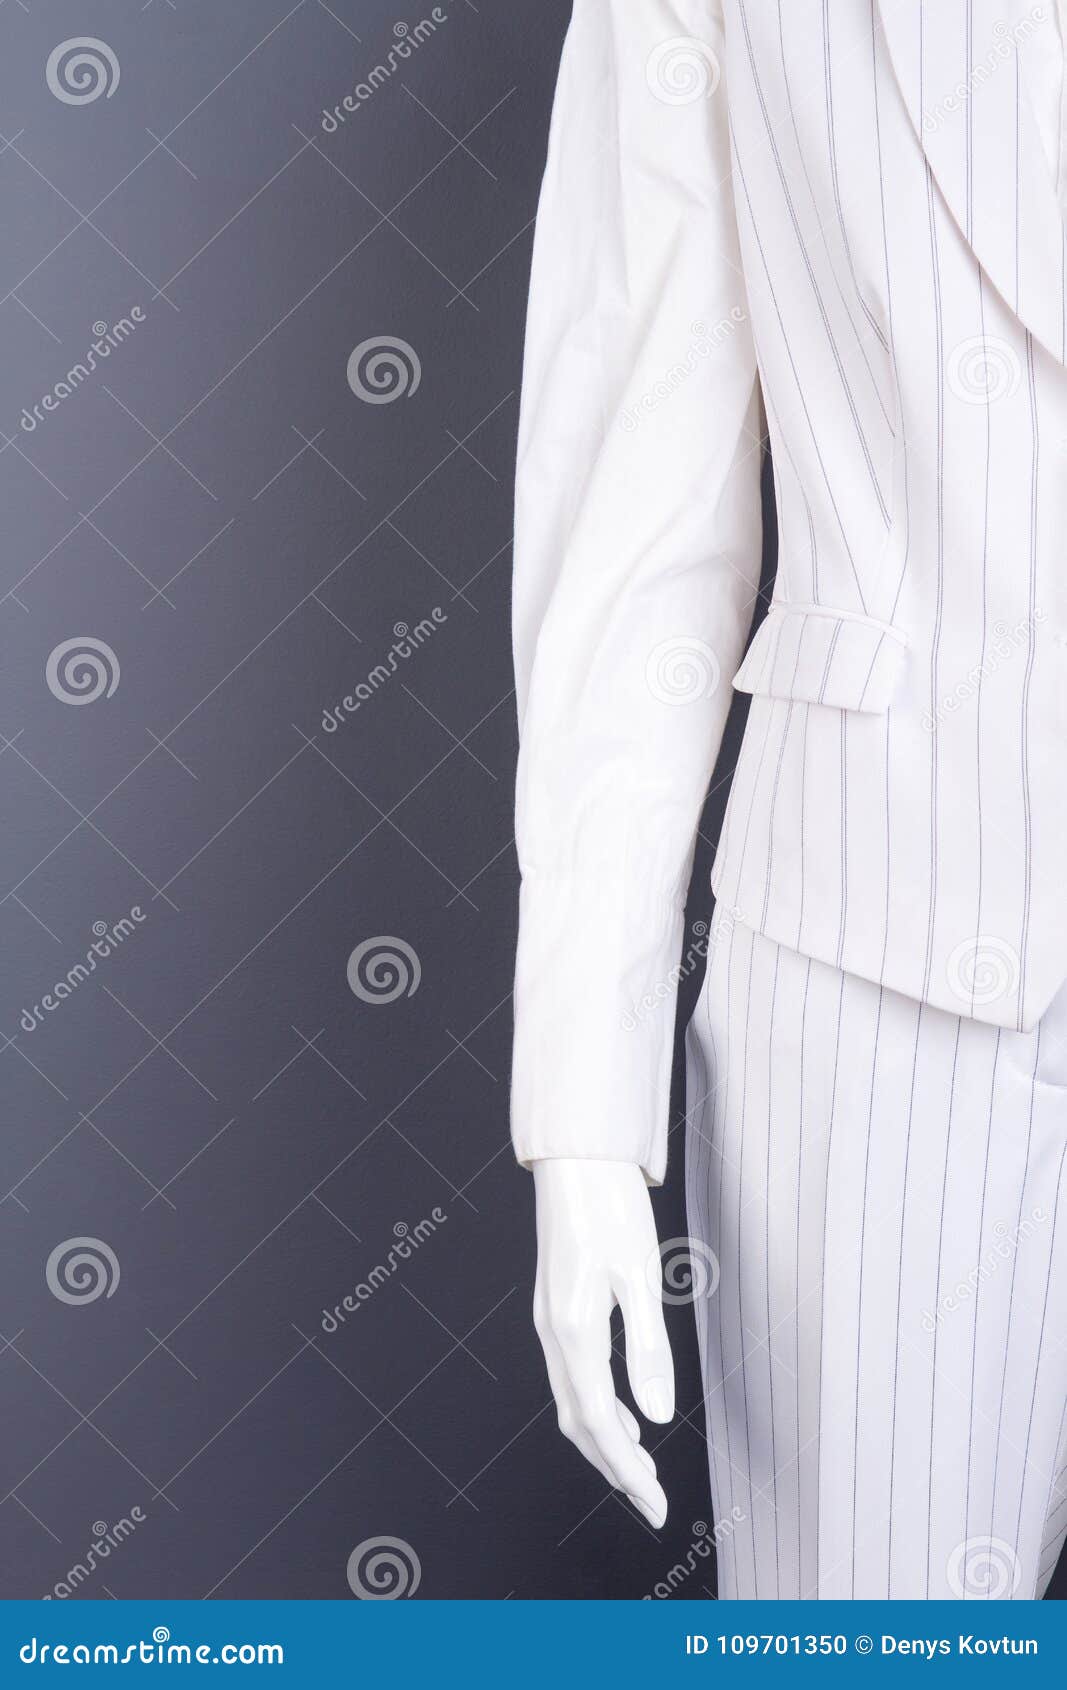 Women Formal Business Office Pant Suits Work Wear Tuxedos Ladies White Suits  | eBay